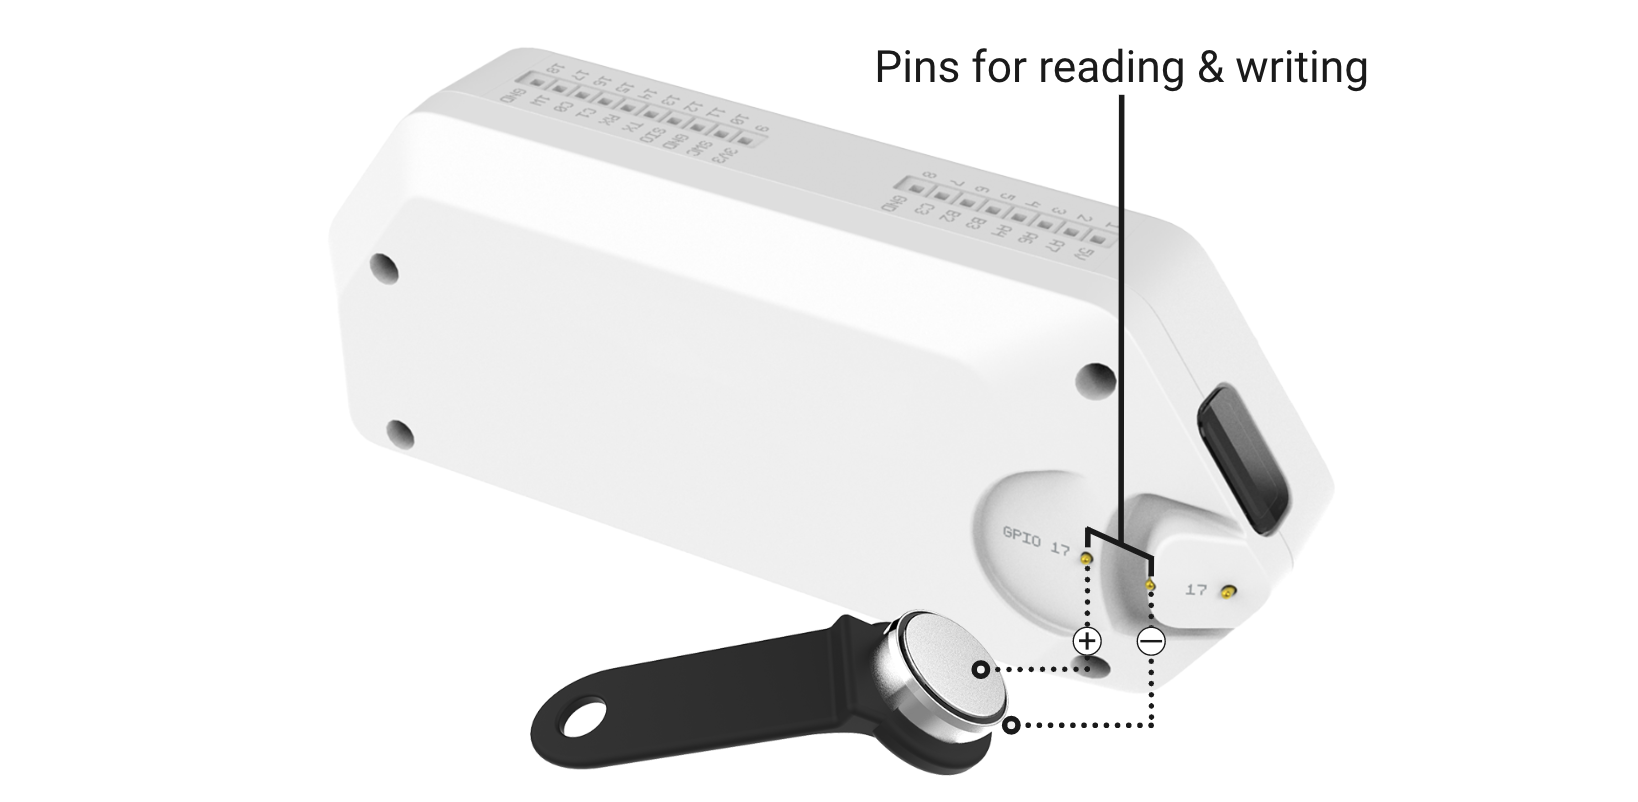 Pins used for reading and writing